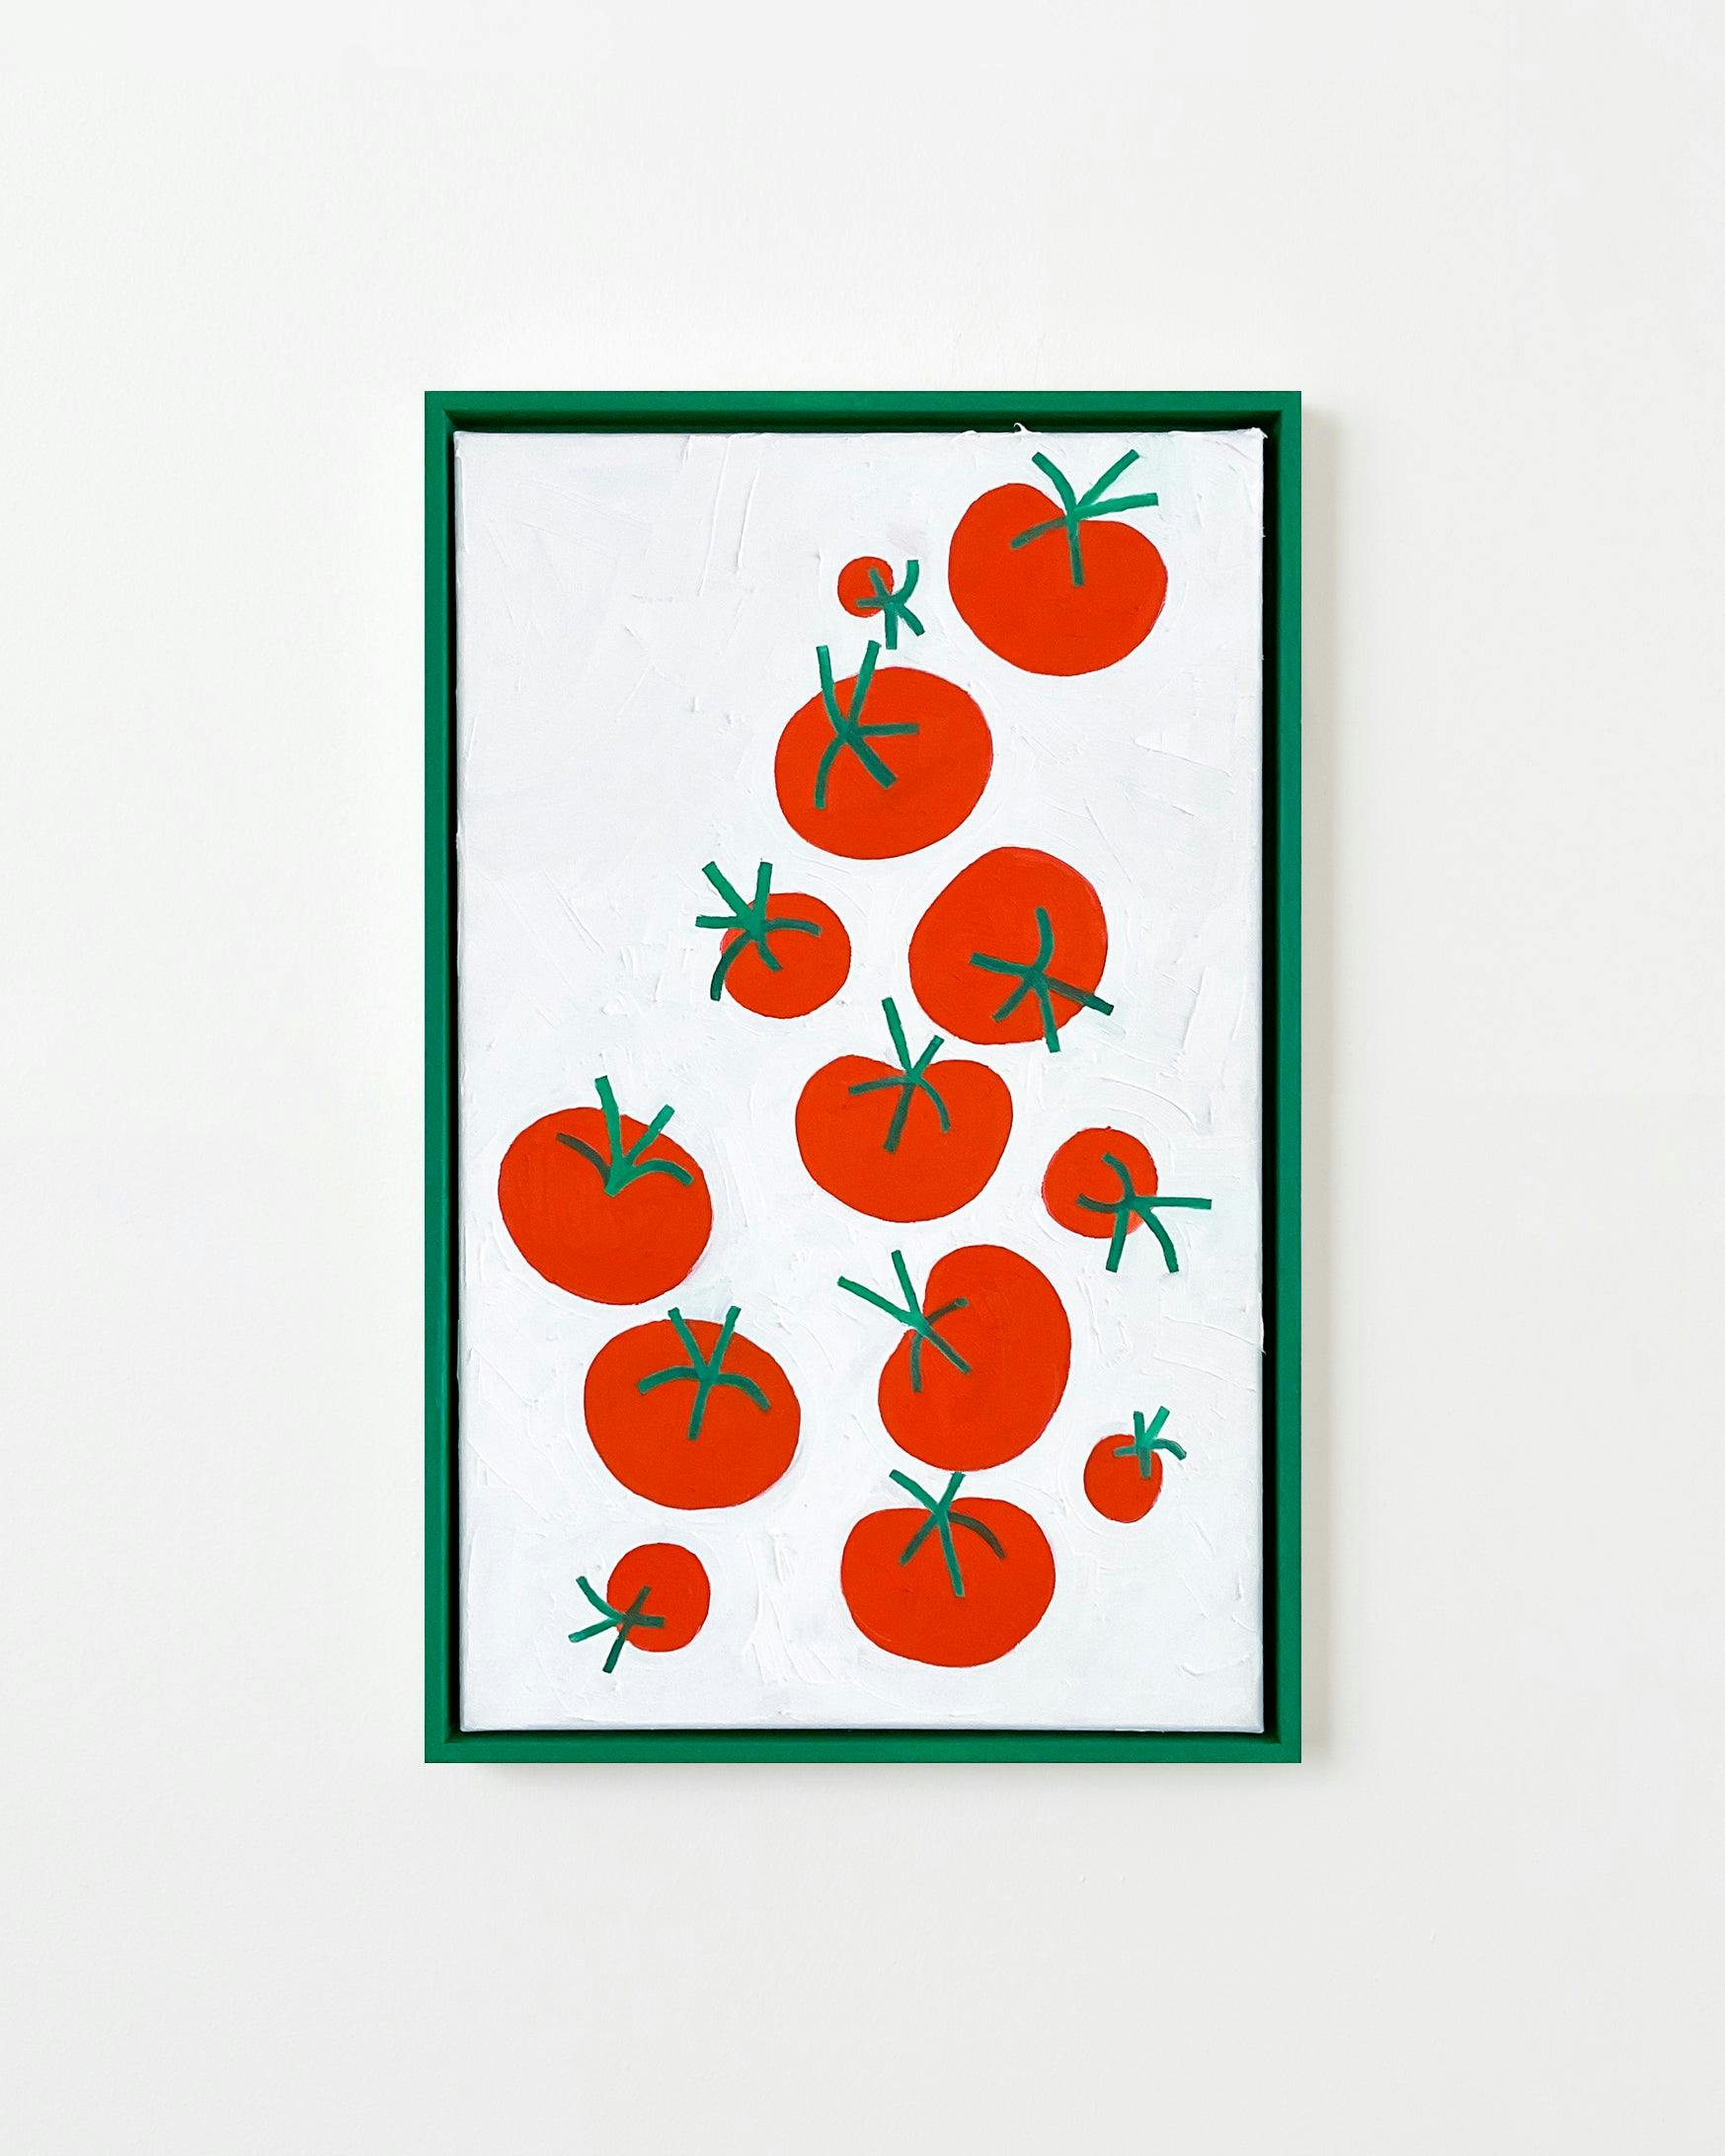 Painting by Frederique Matti titled "Tomatoes".